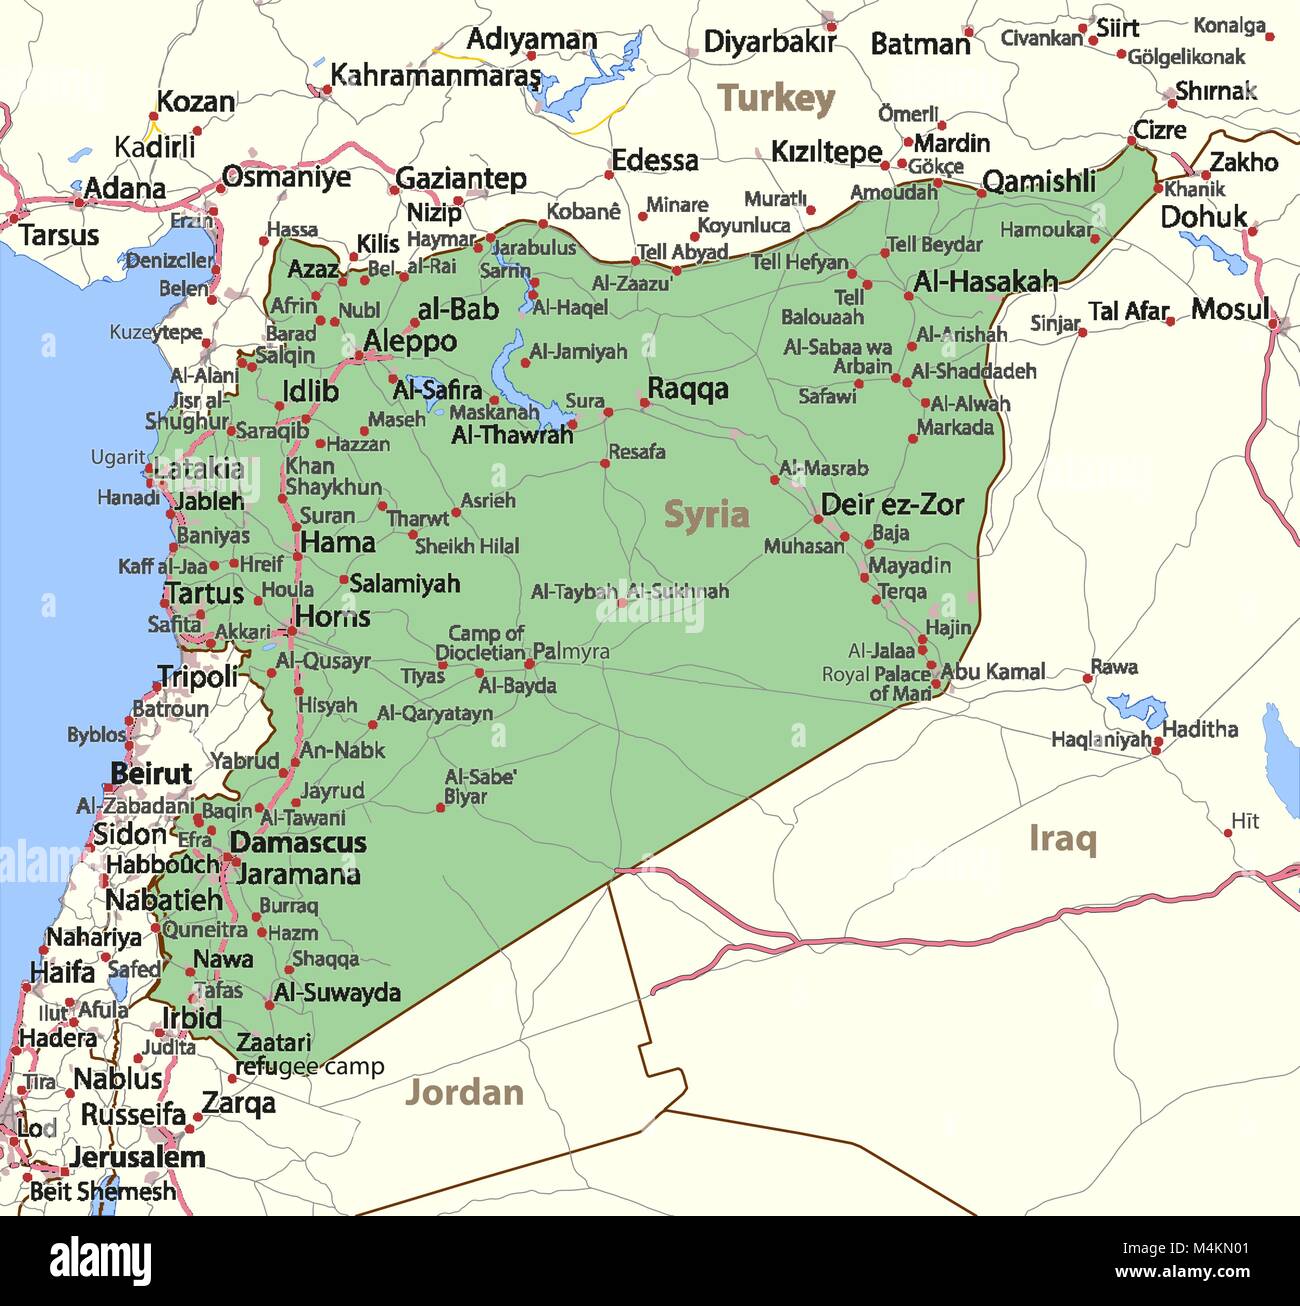 Map of Syria. Shows country borders, urban areas, place names and roads. Labels in English where possible. Projection: Mercator. Stock Vector